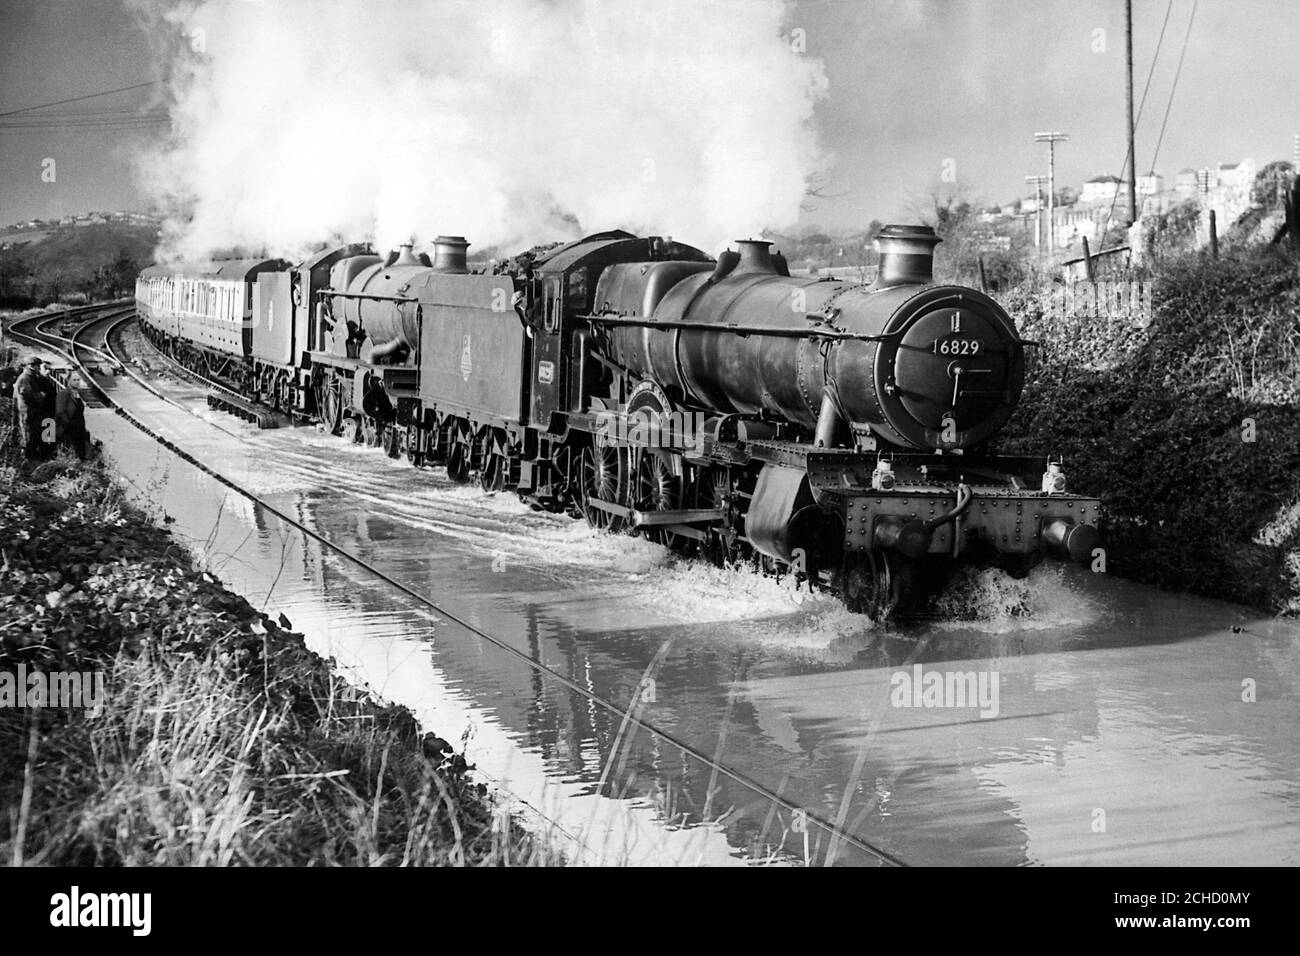 The Cornish Riviera express, headed by two engines, ploughs at walking pace through flood waters at Plympton Devon on its way to London. Stock Photo